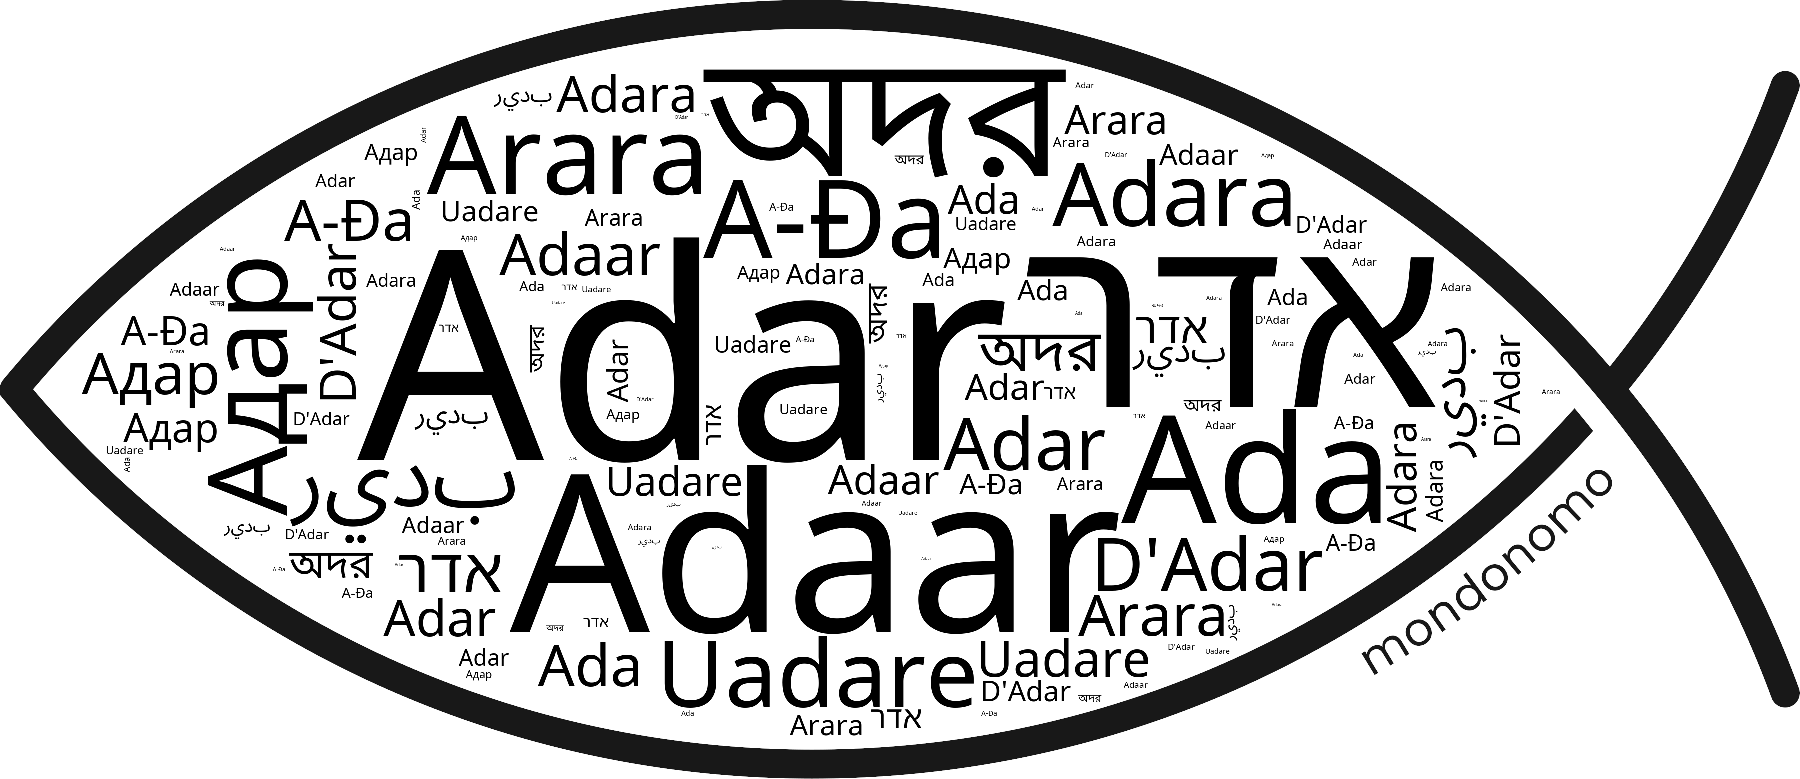 Name Adar in the world's Bibles